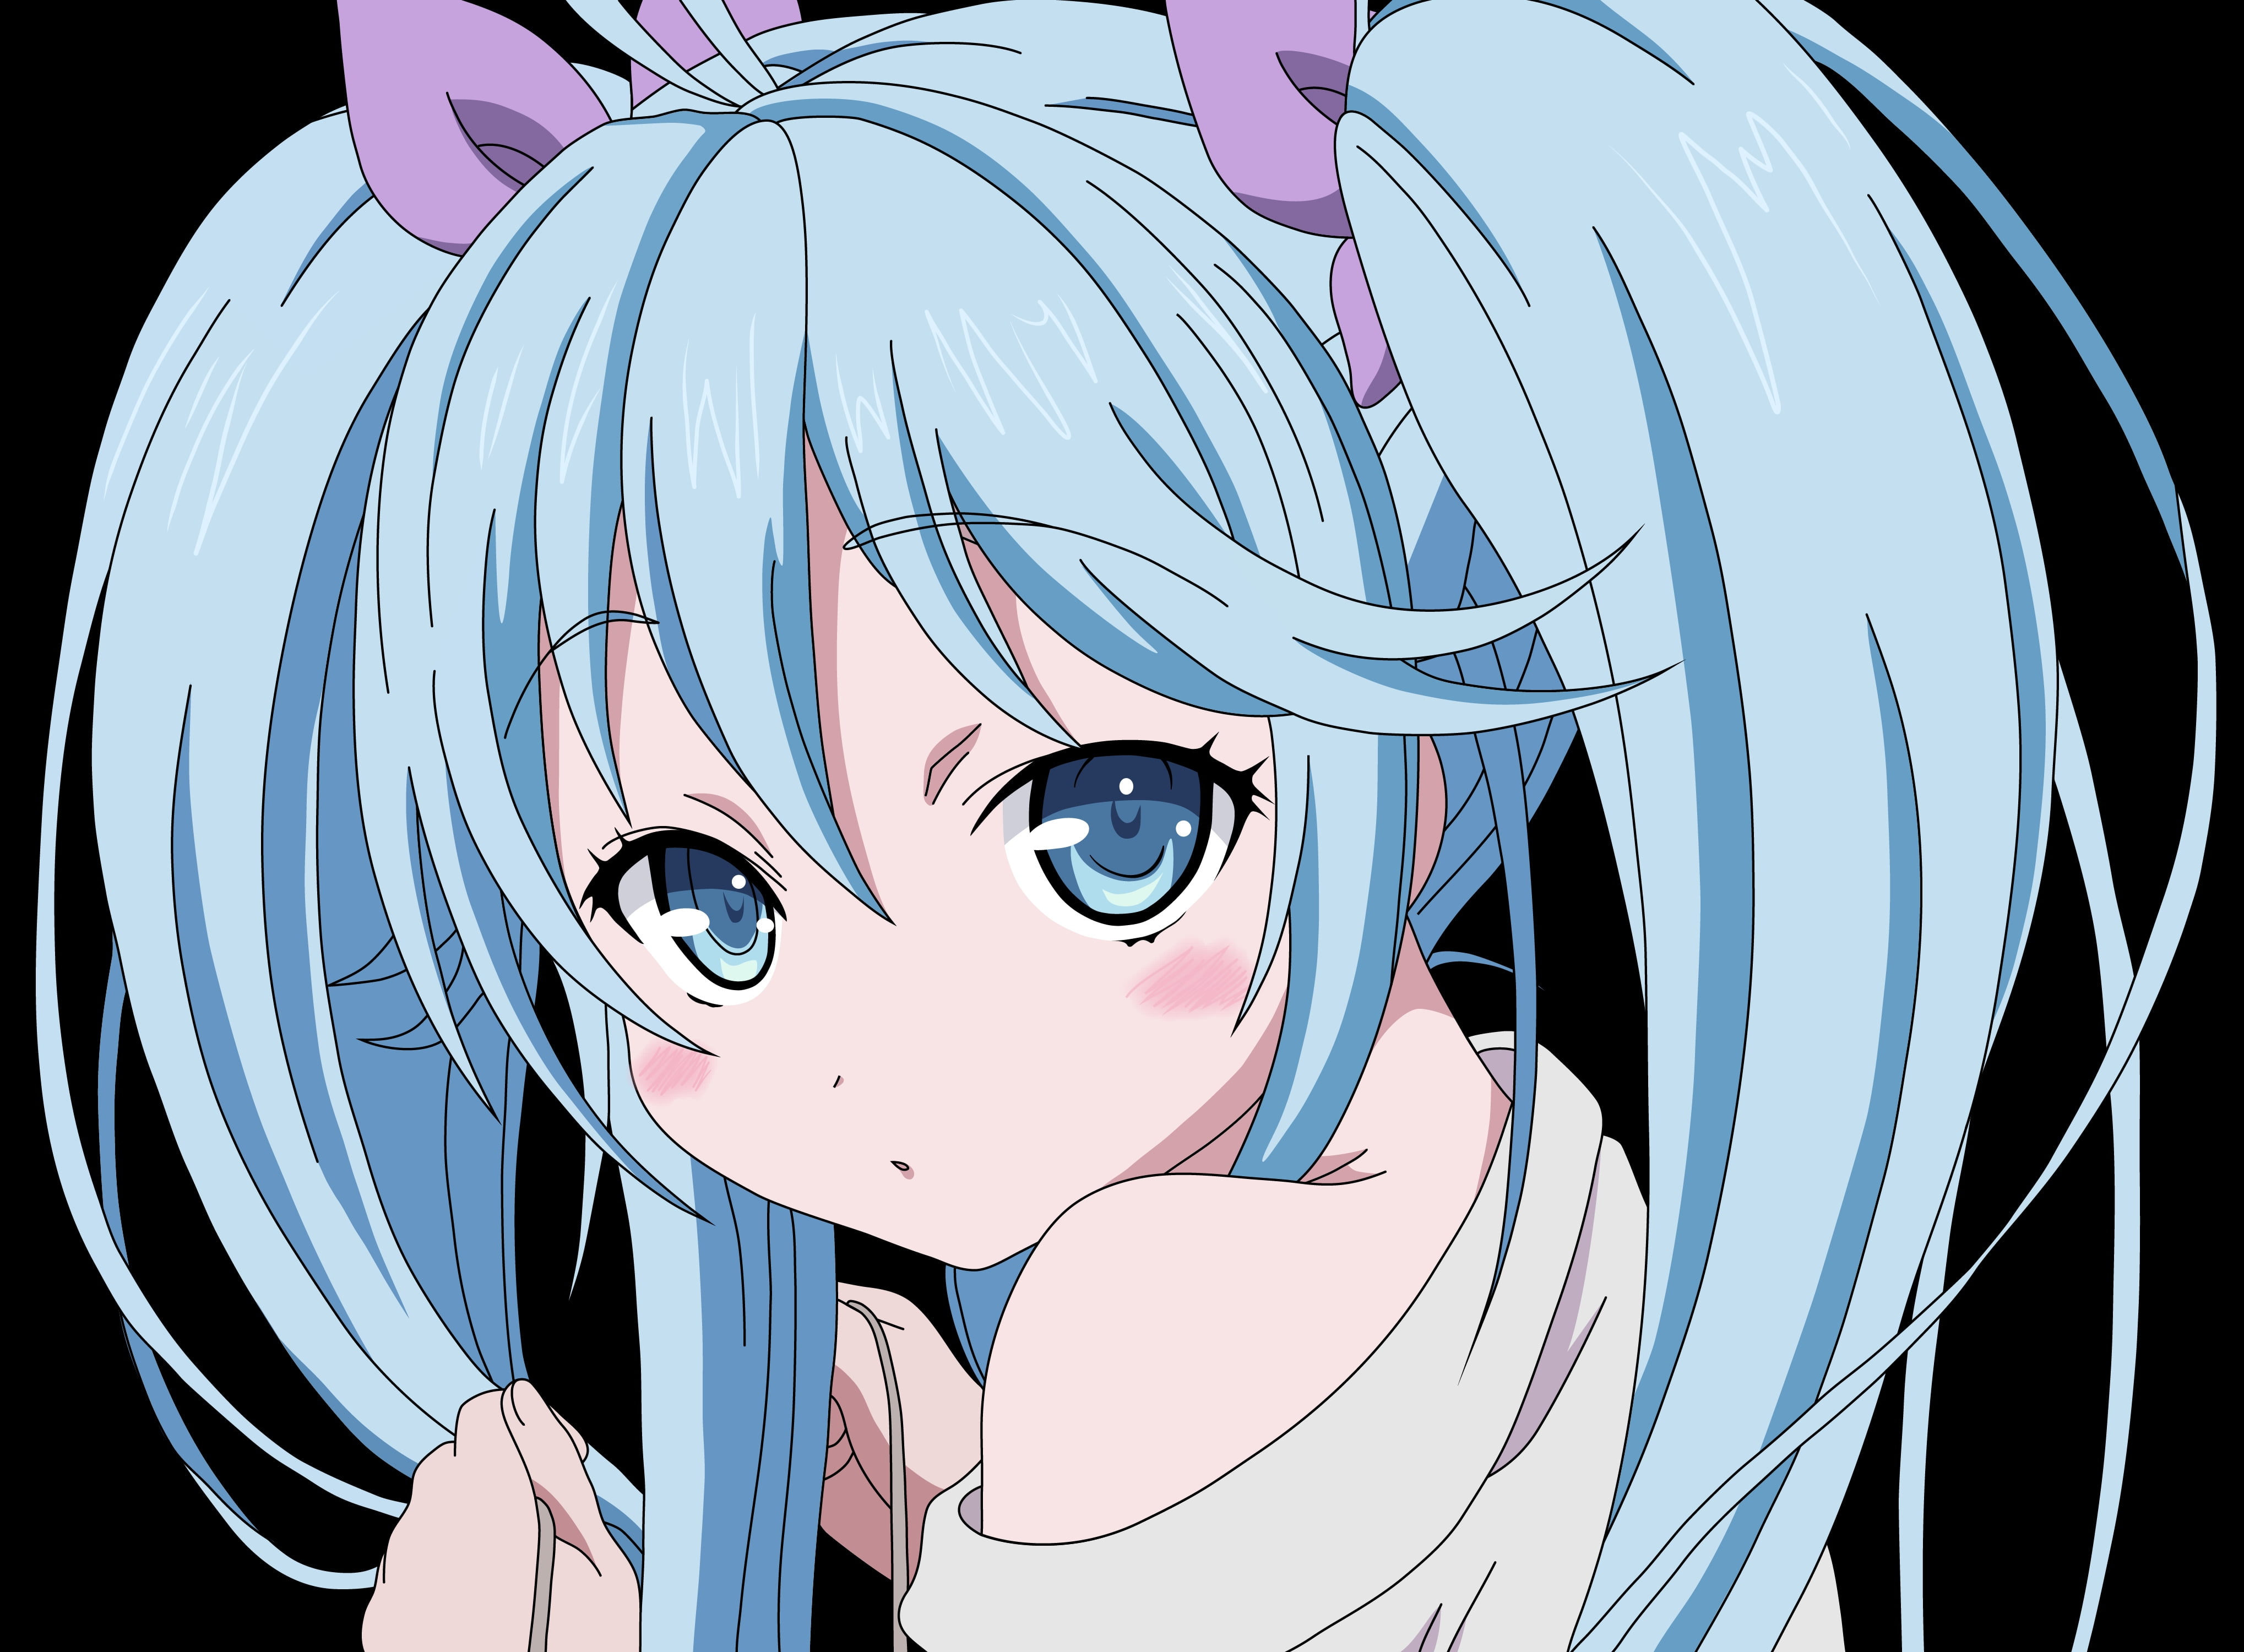 Smirking Anime Girl with Blue Hair - wide 4